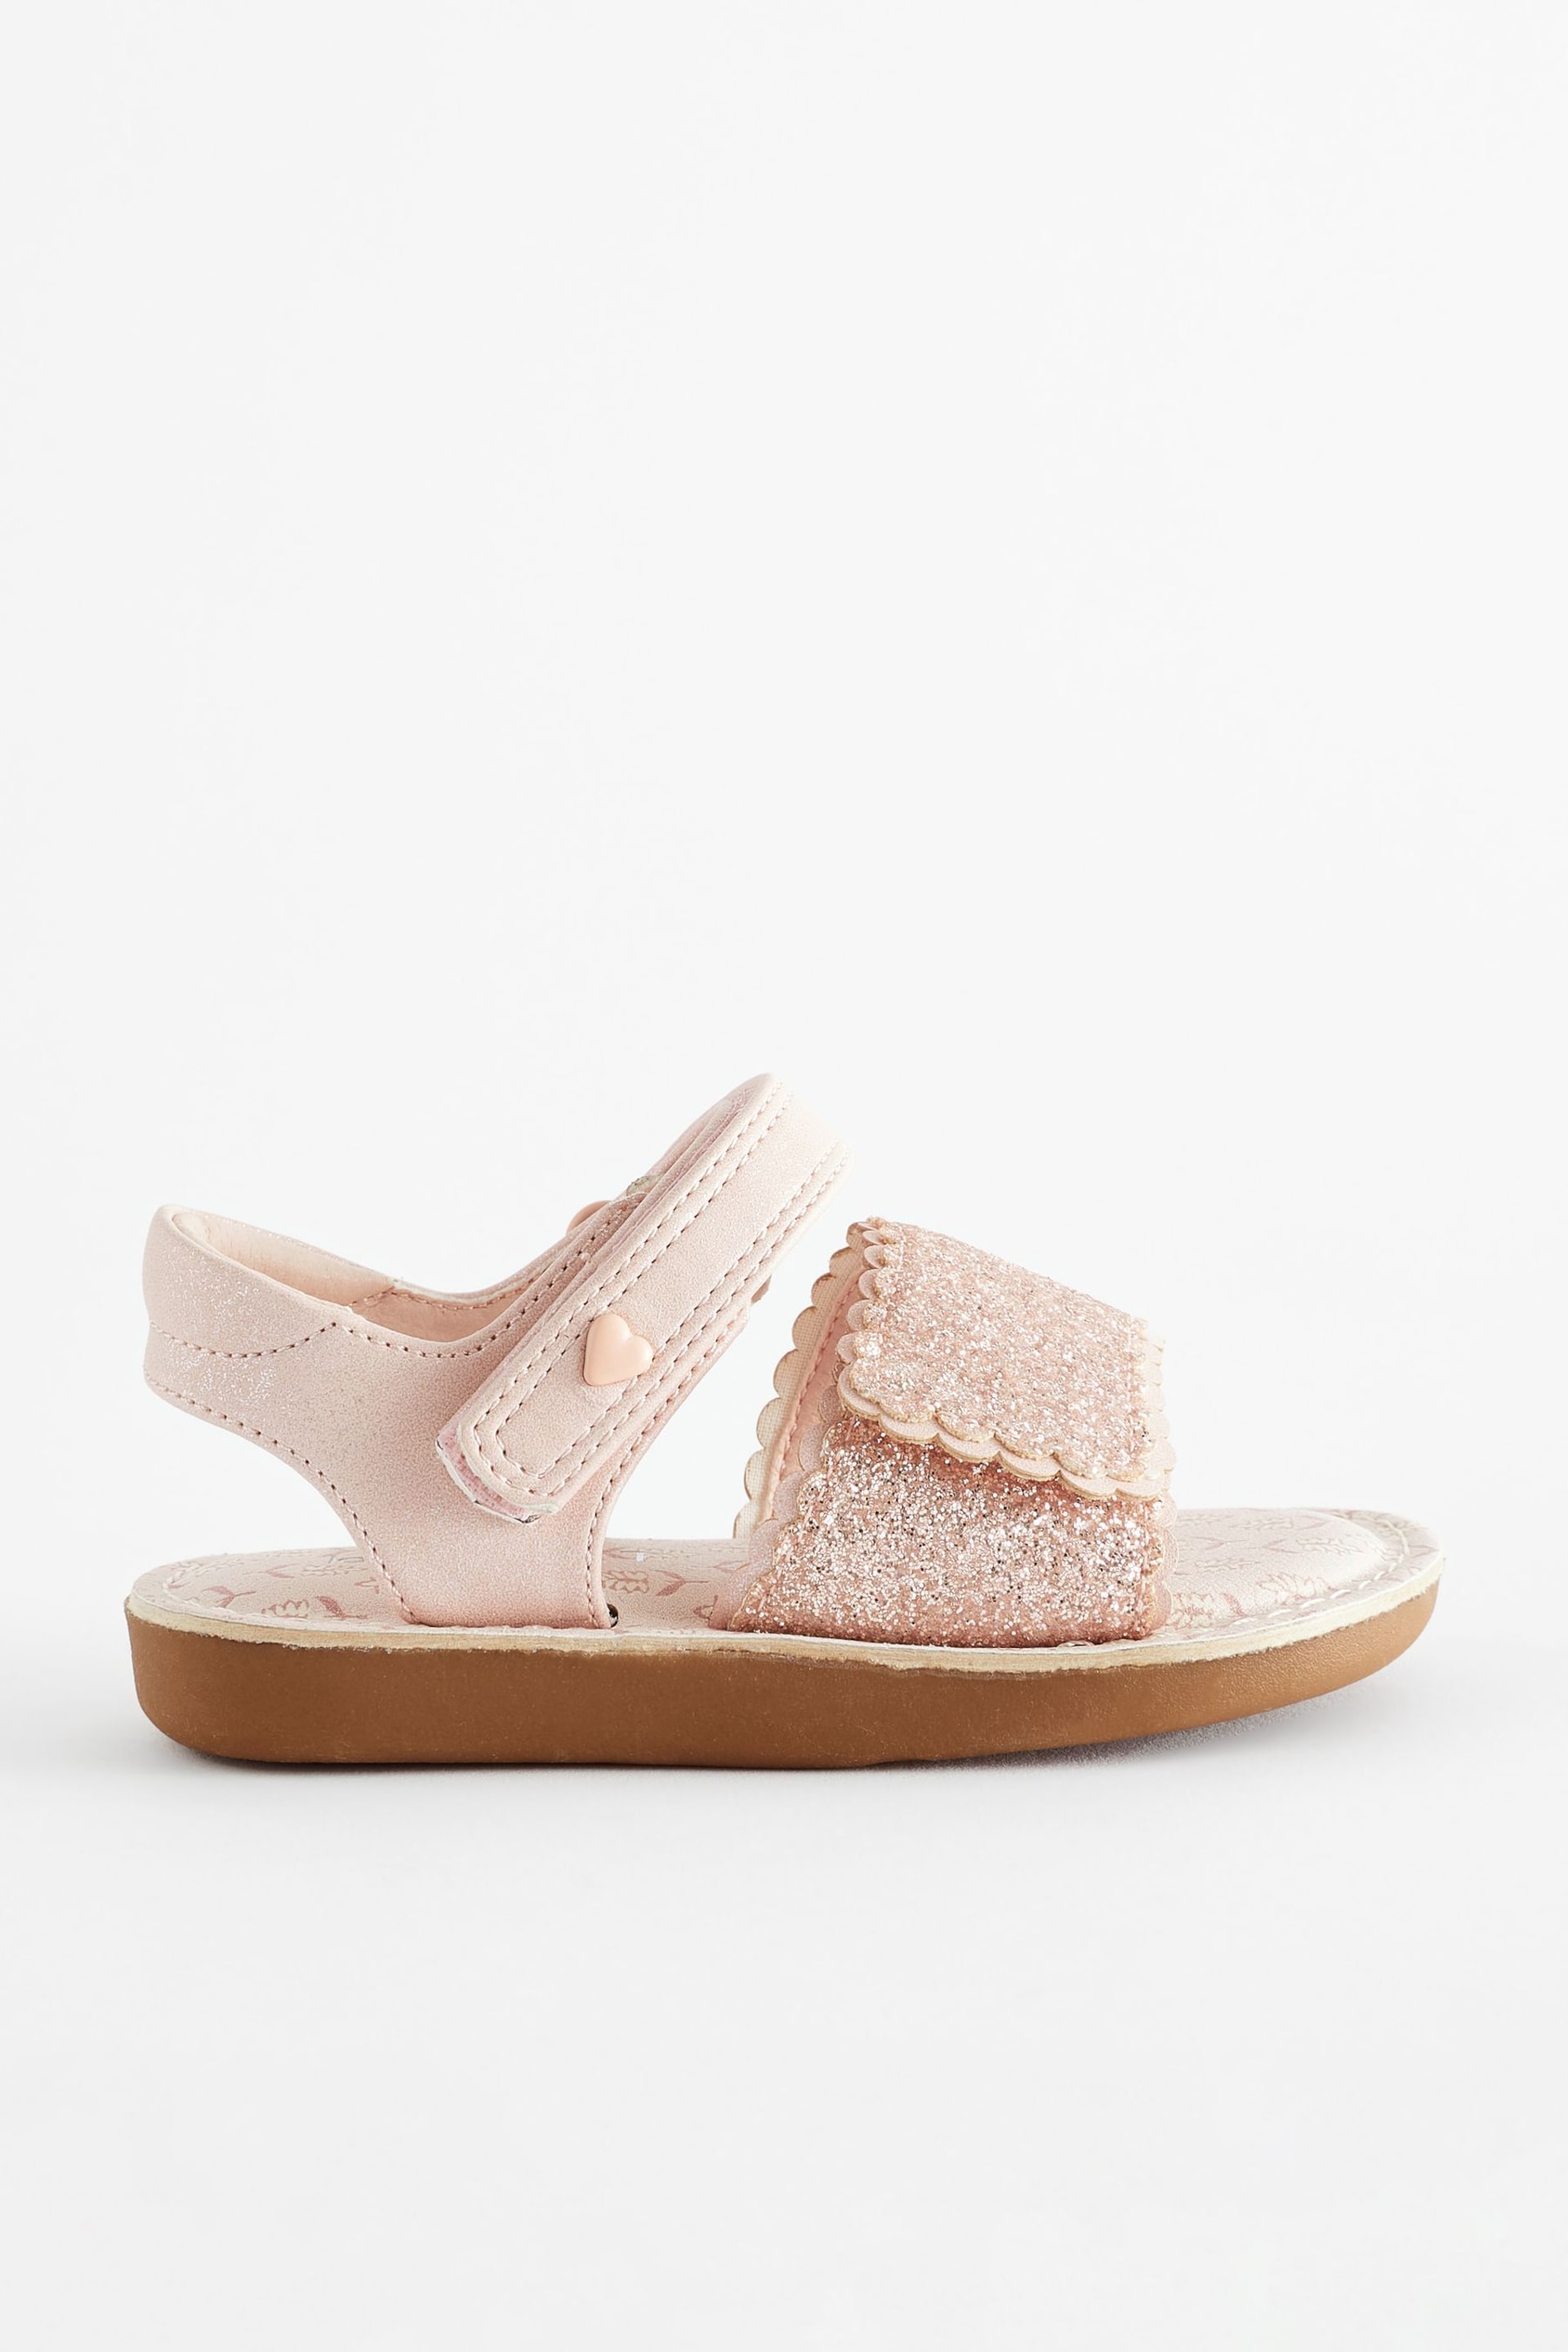 Pink Glitter Occasion Sandals - Image 2 of 7